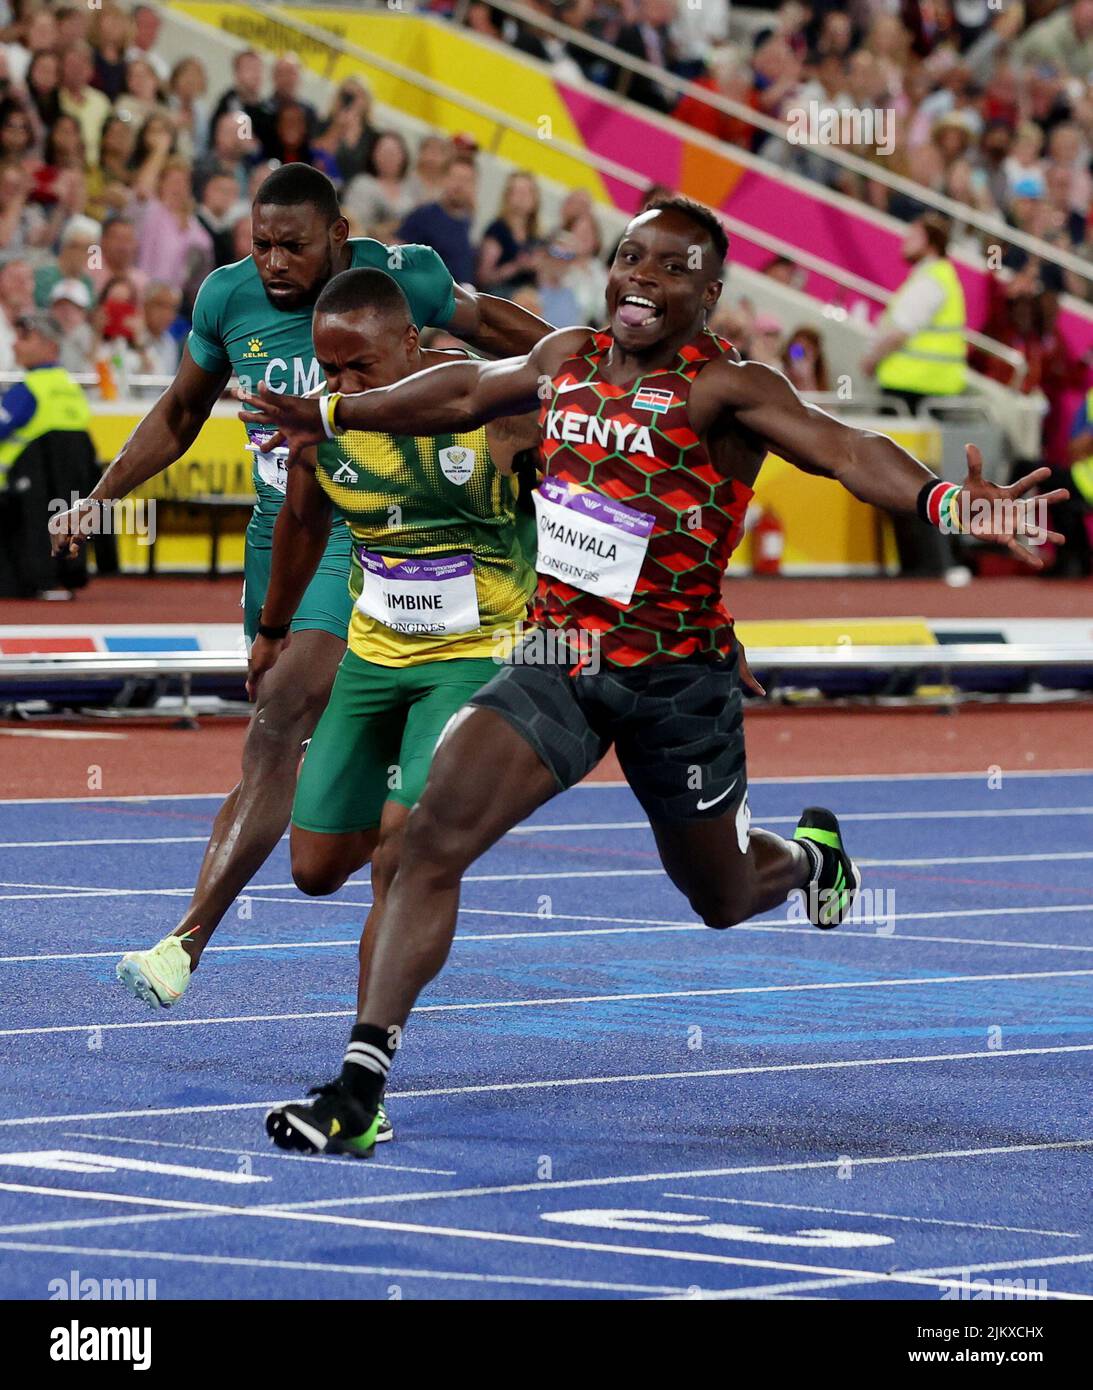 Commonwealth Games - Athletics - Men's 100m - Final - Alexander Stadium, Birmingham, Britain - August 3, 2022 Kenya's Ferdinand Omanyala celebrates as he crosses the line to win the gold medal ahead of silver medallist South Africa's Akani Simbine REUTERS/Phil Noble Stock Photo